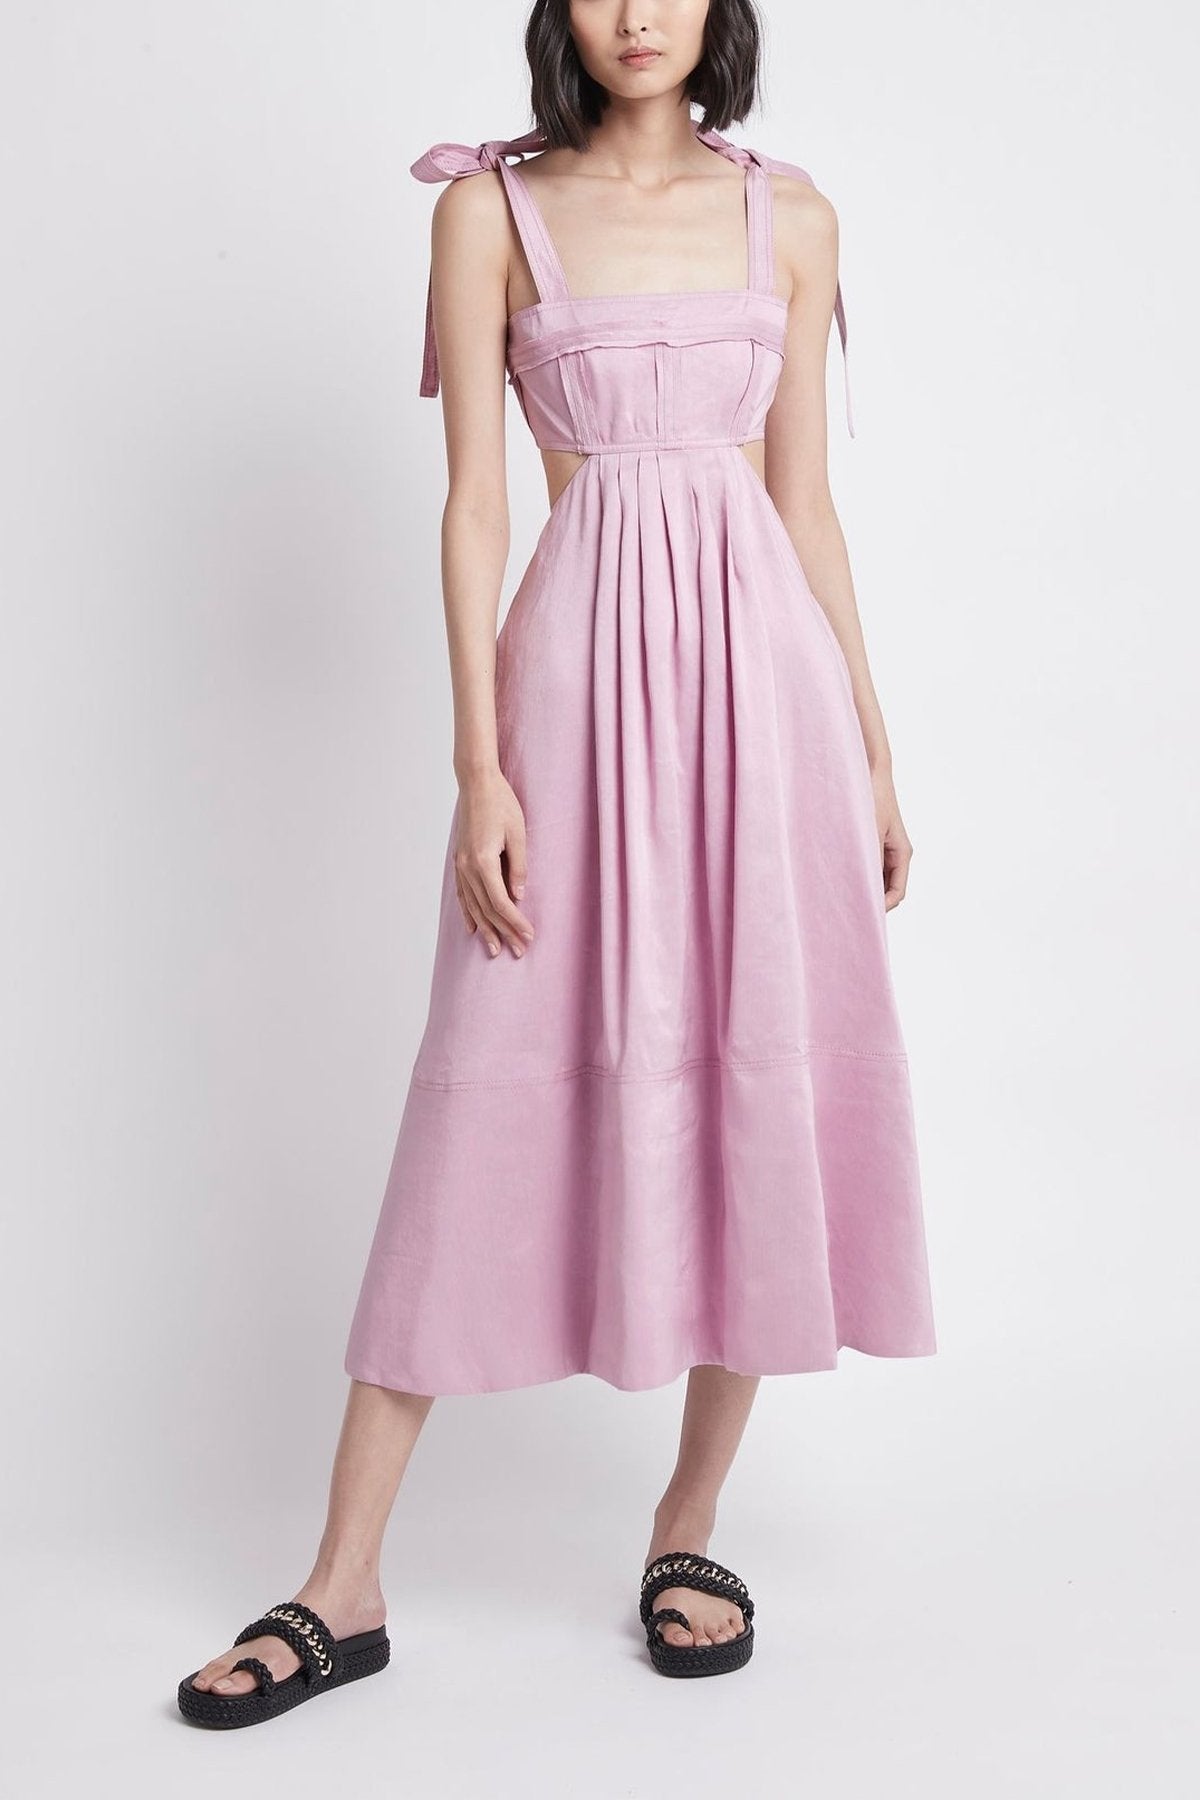 Frequency Cut Out Midi Dress in Lilac - shop-olivia.com